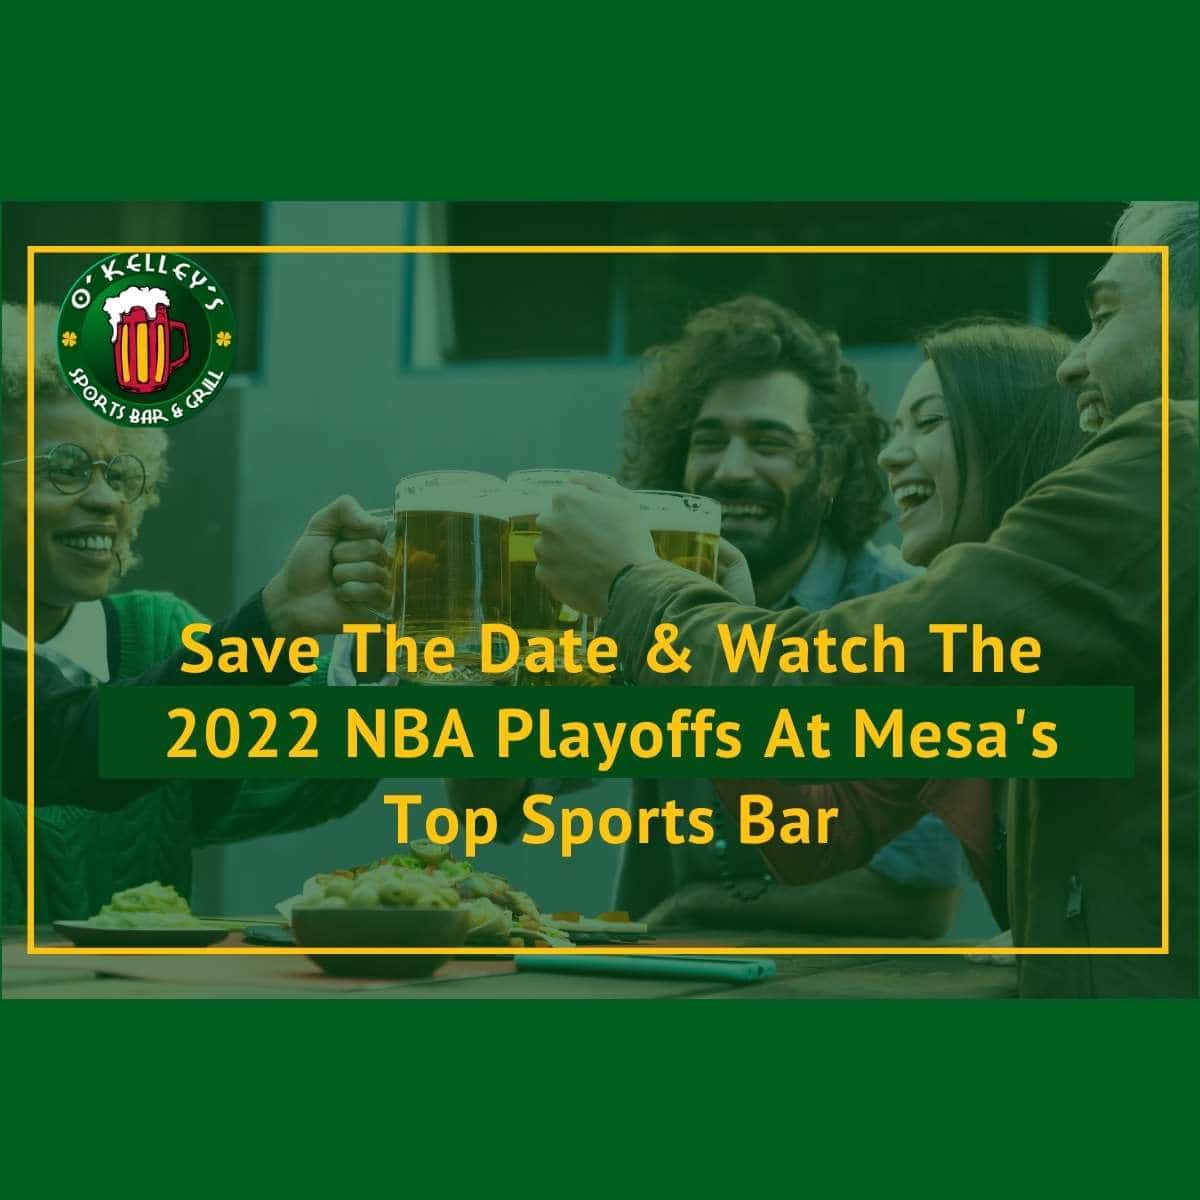 Save The Date and Watch The 2022 NBA Playoffs At Mesas Top Sports Bar